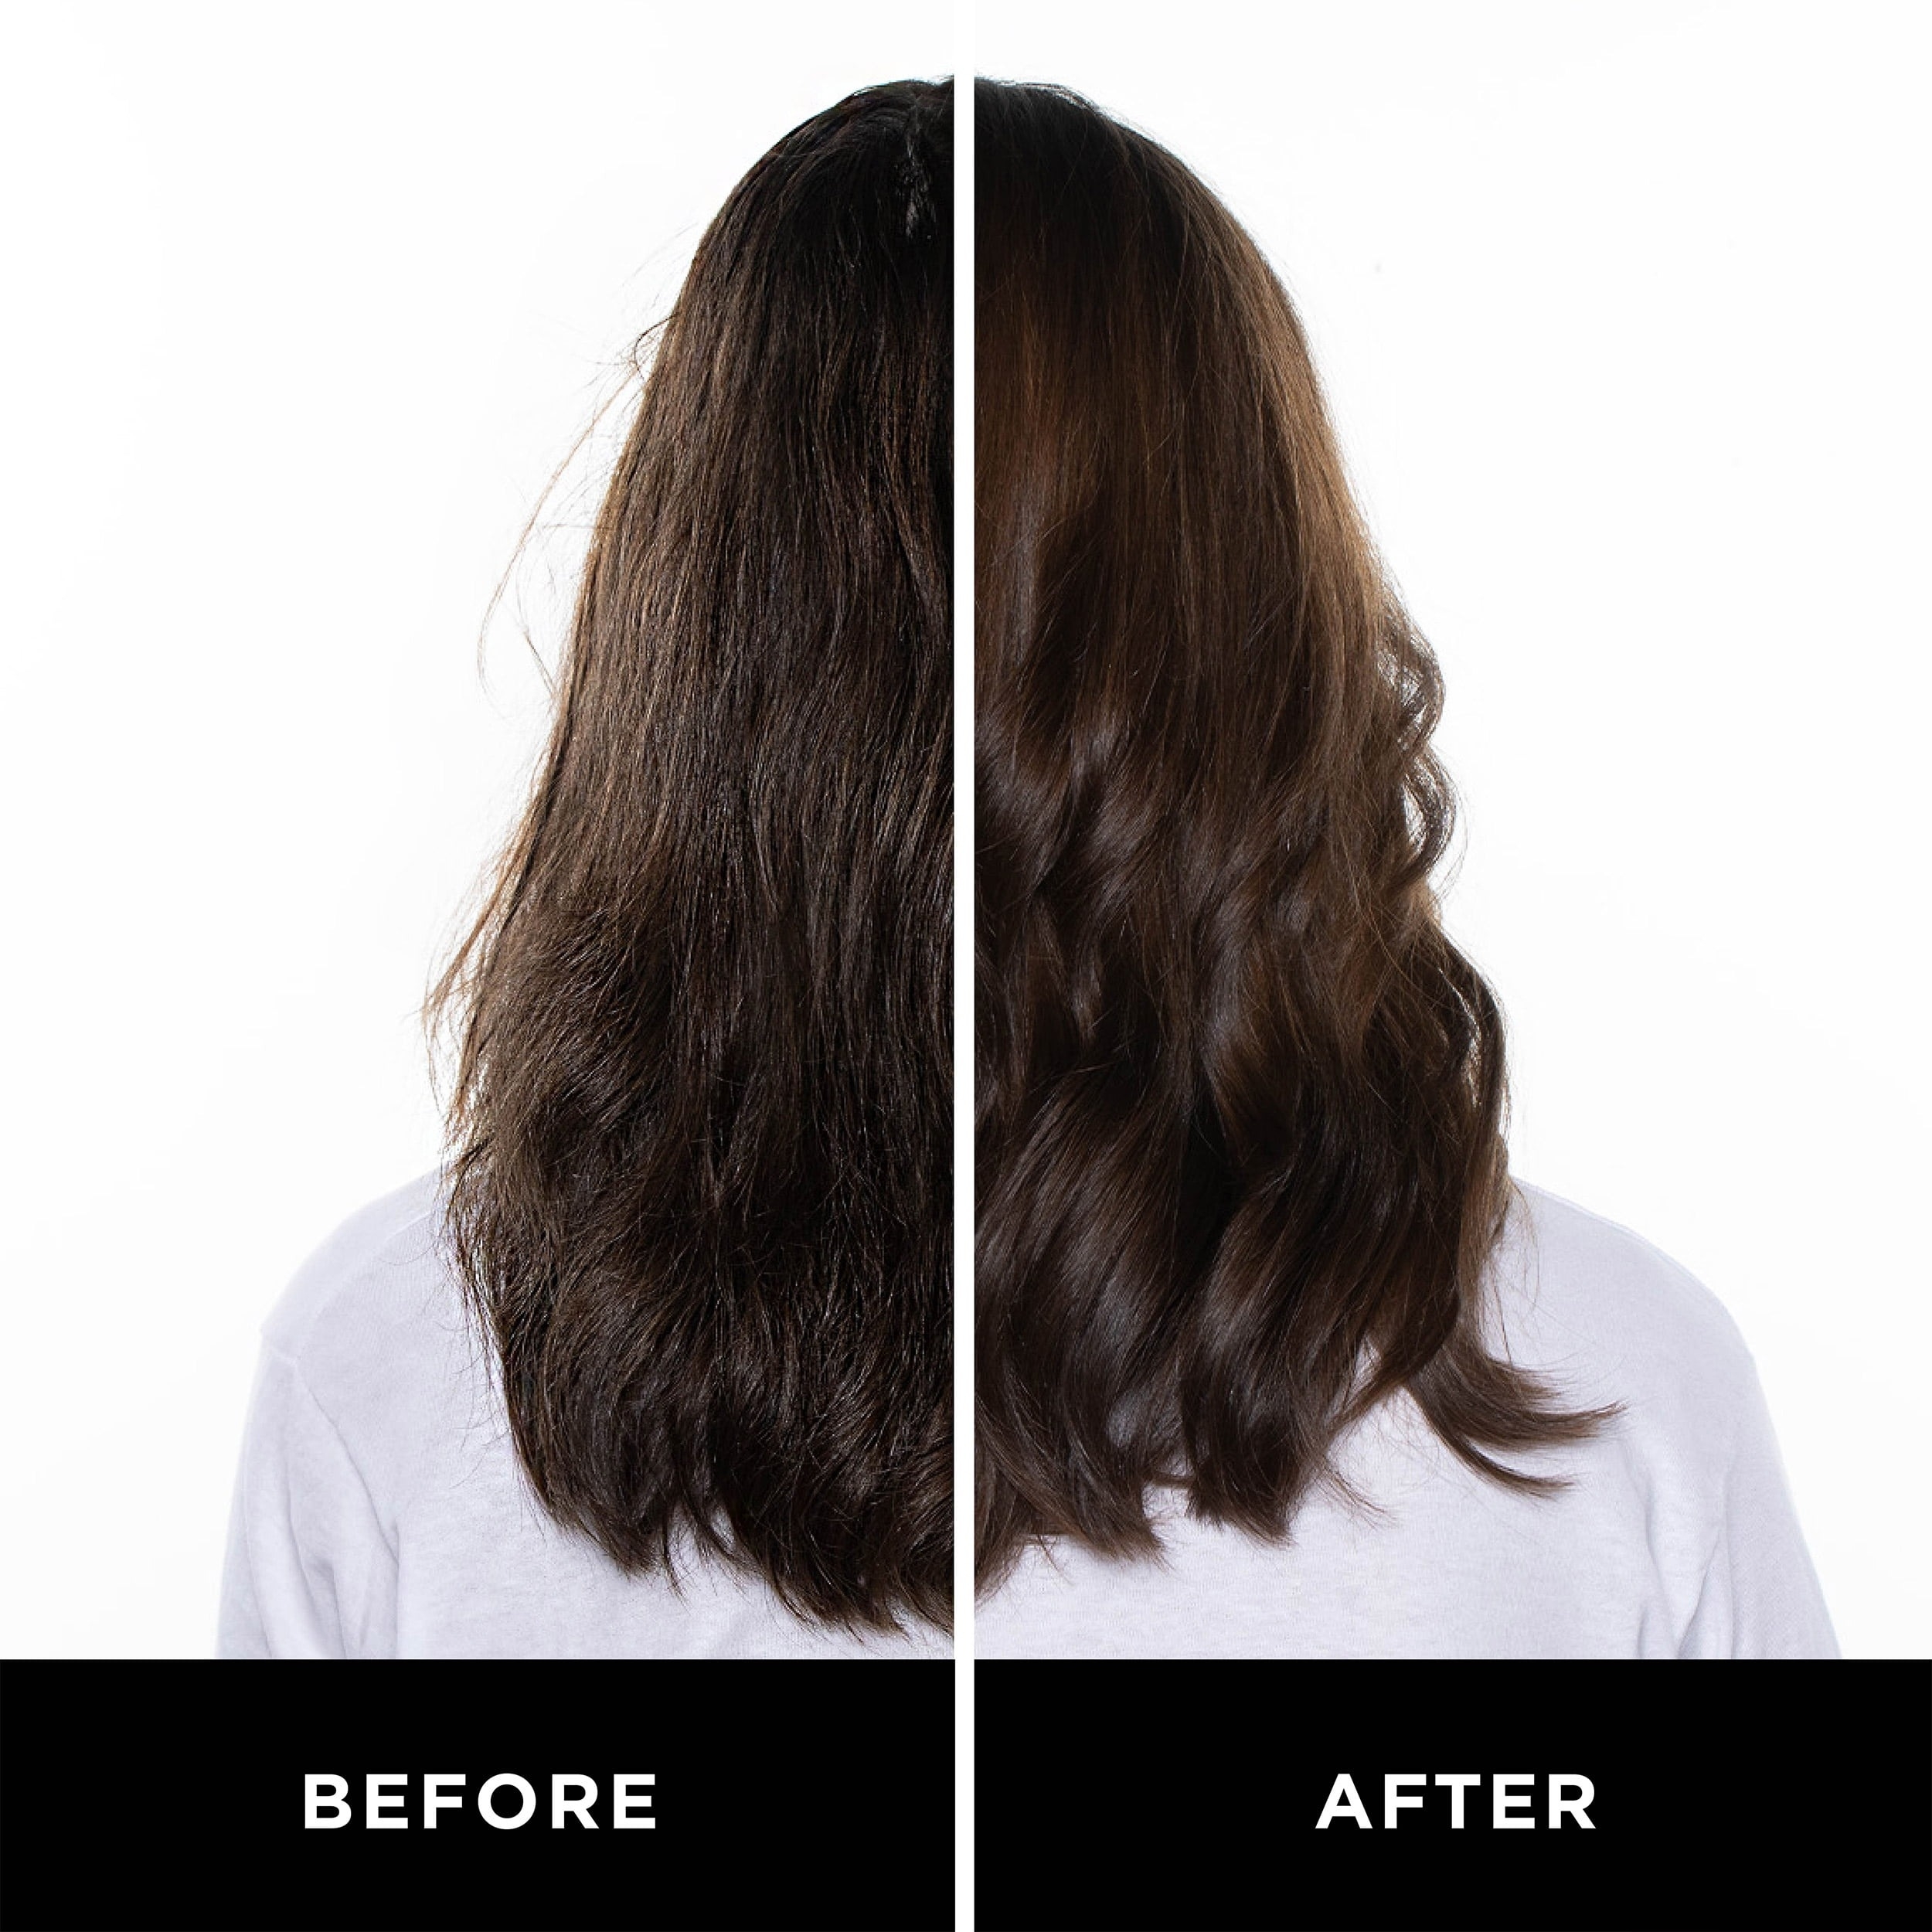 a model showing their hair before and after using the spray